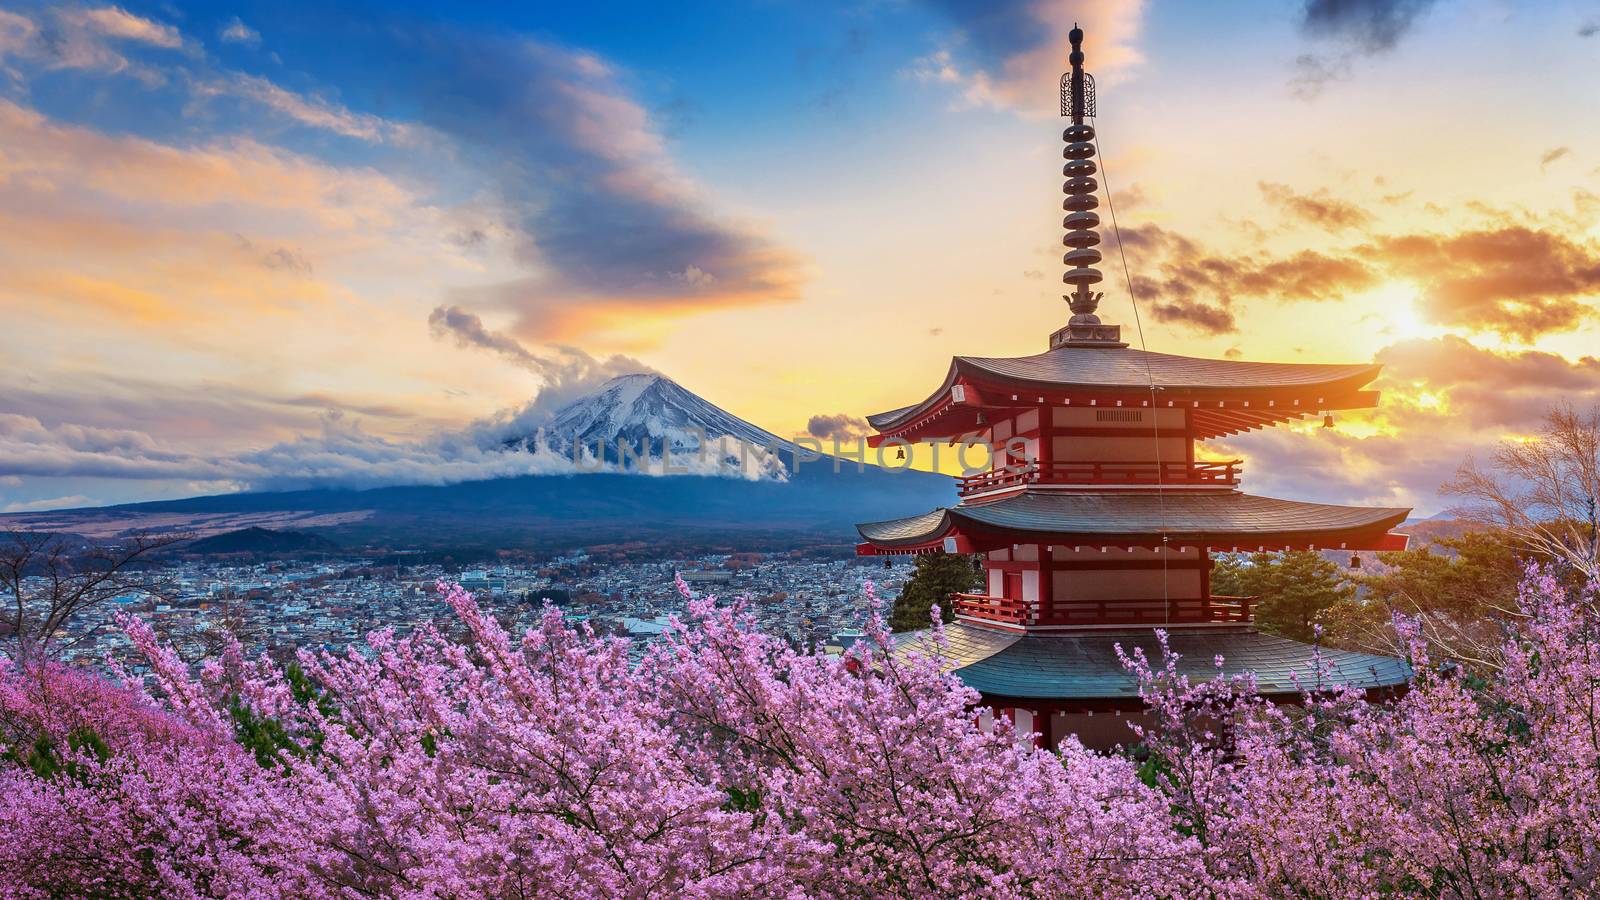 Beautiful landmark of Fuji mountain and Chureito Pagoda with cherry blossoms at sunset, Japan. Spring in Japan. by gutarphotoghaphy